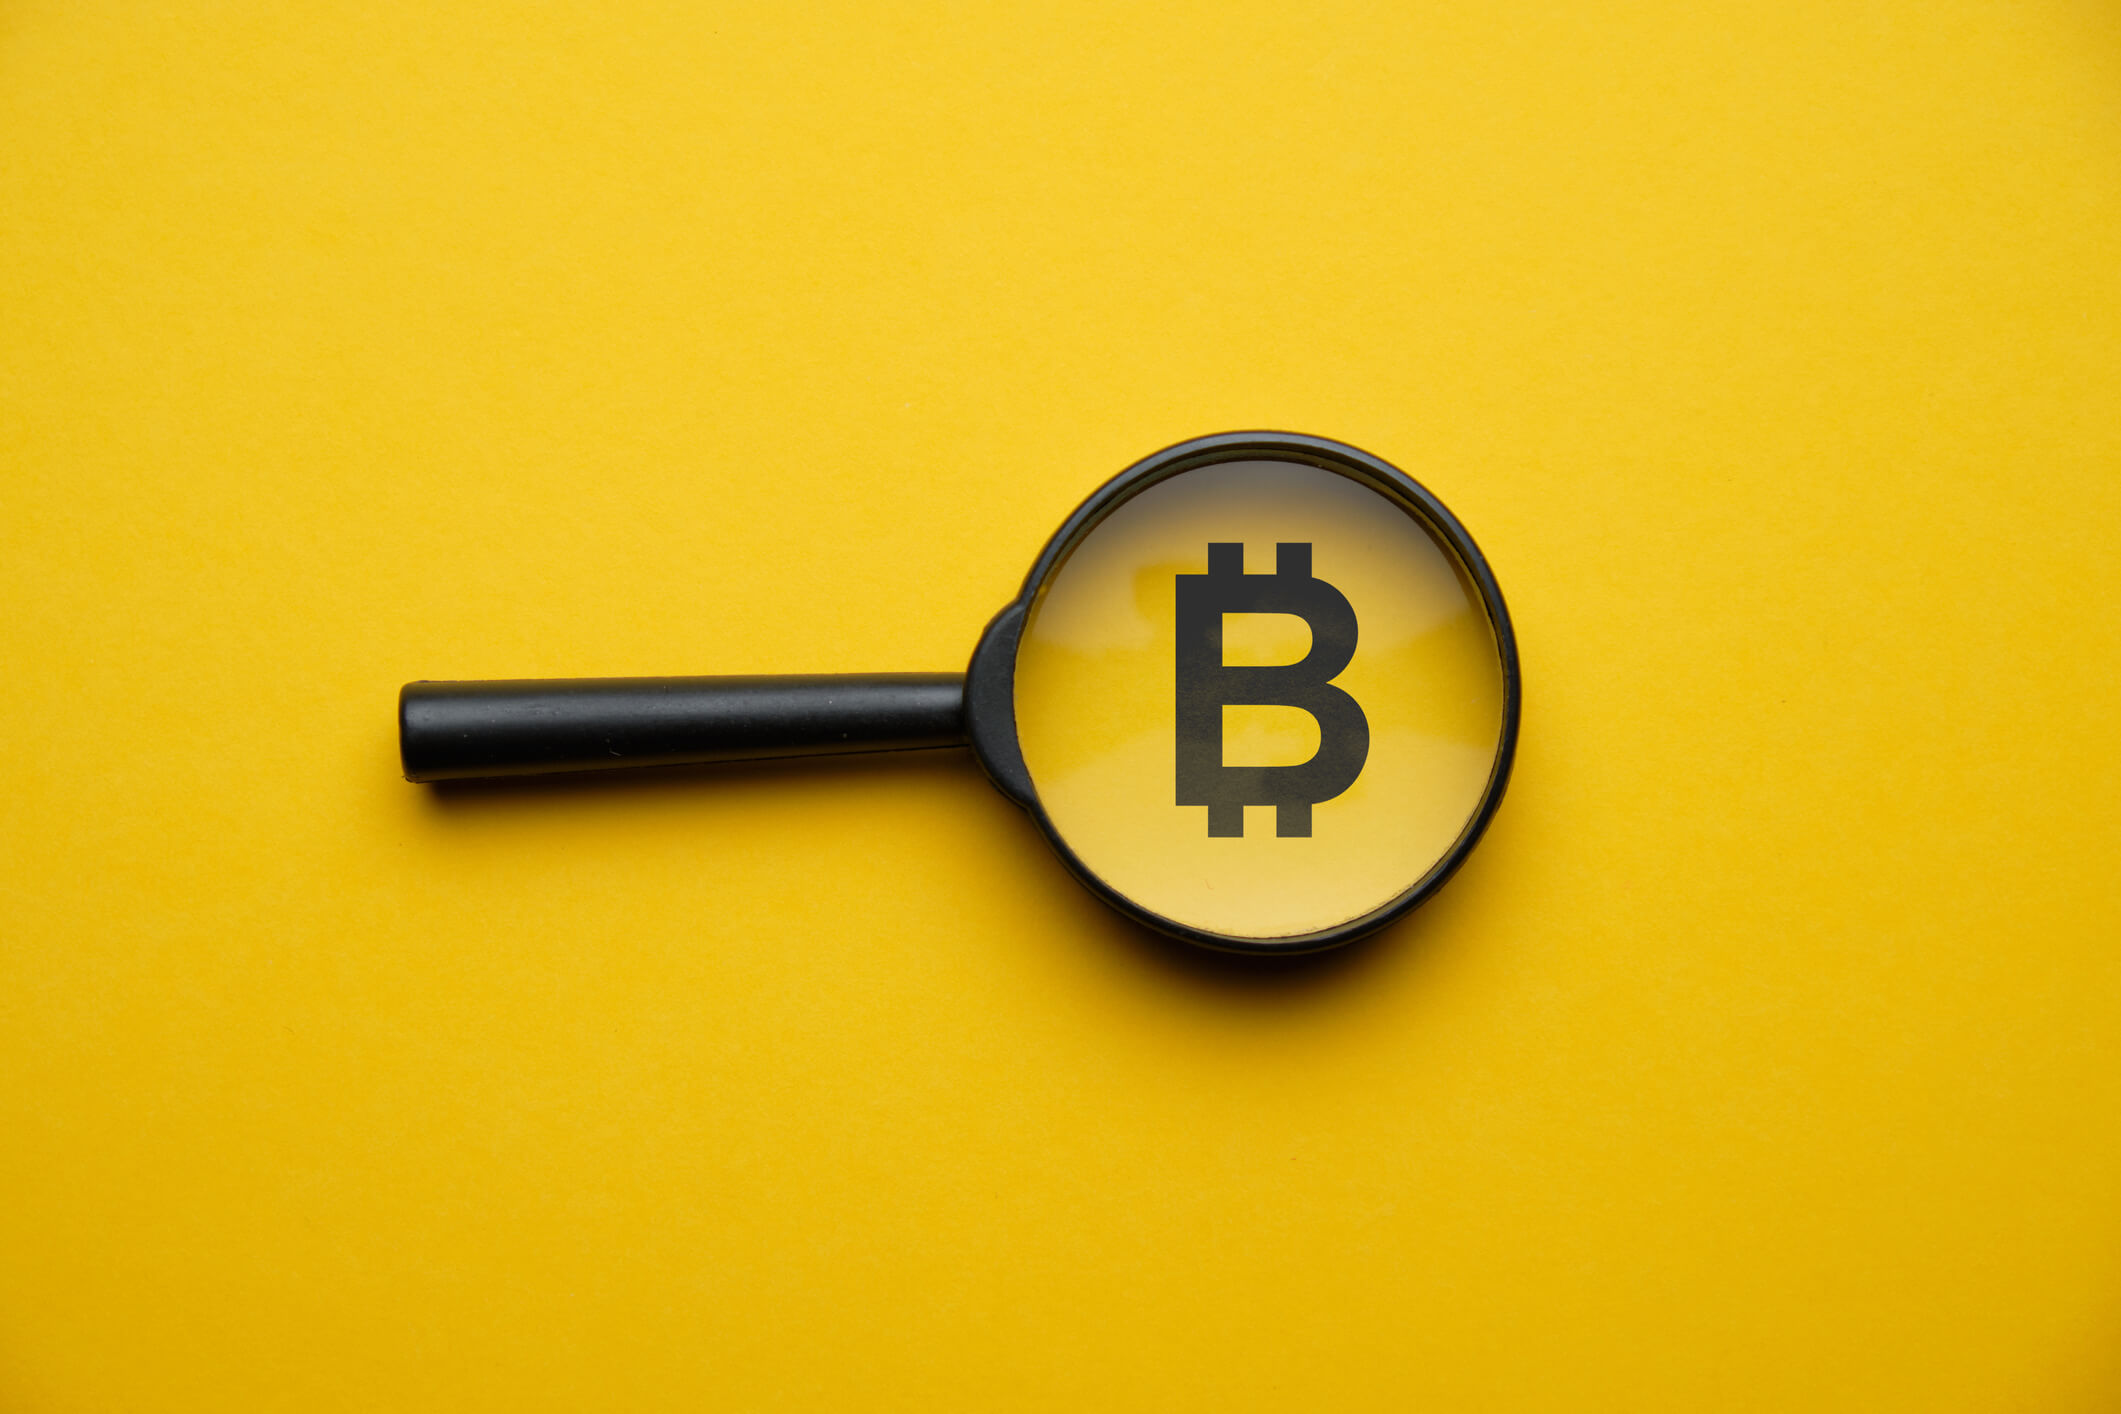 5 Ways You Can Make Money With Bitcoin Remote Jobs – Latium Freelancing